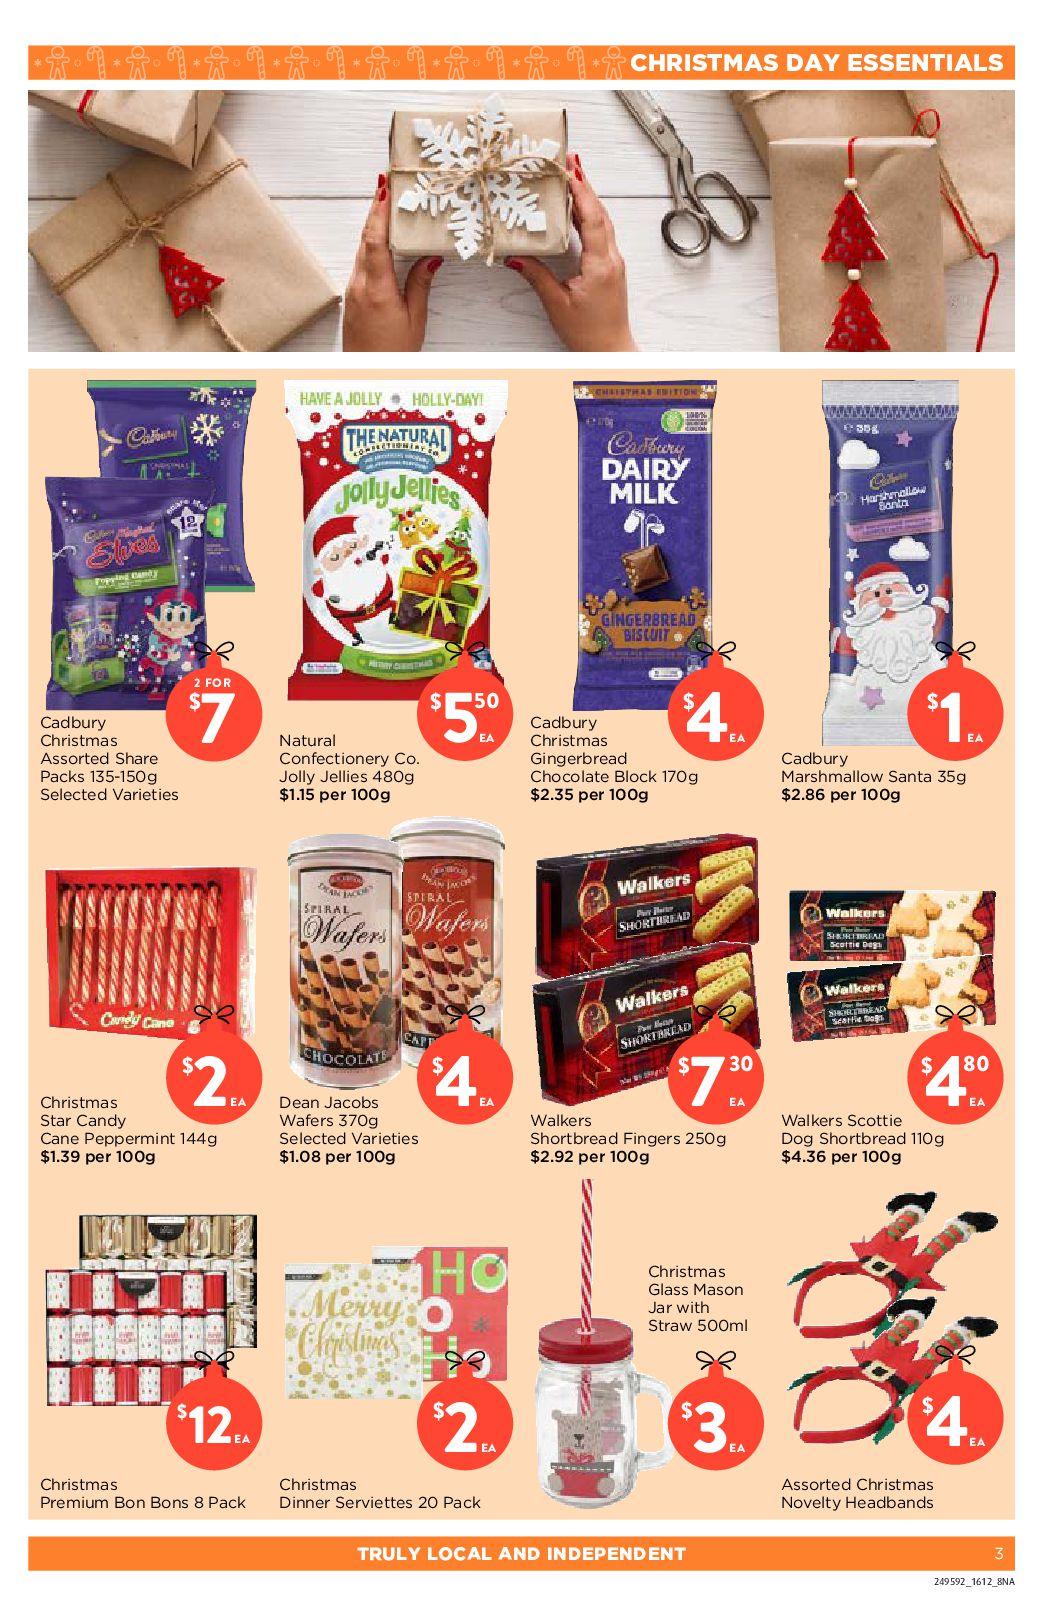 FoodWorks Catalogues from 16 December